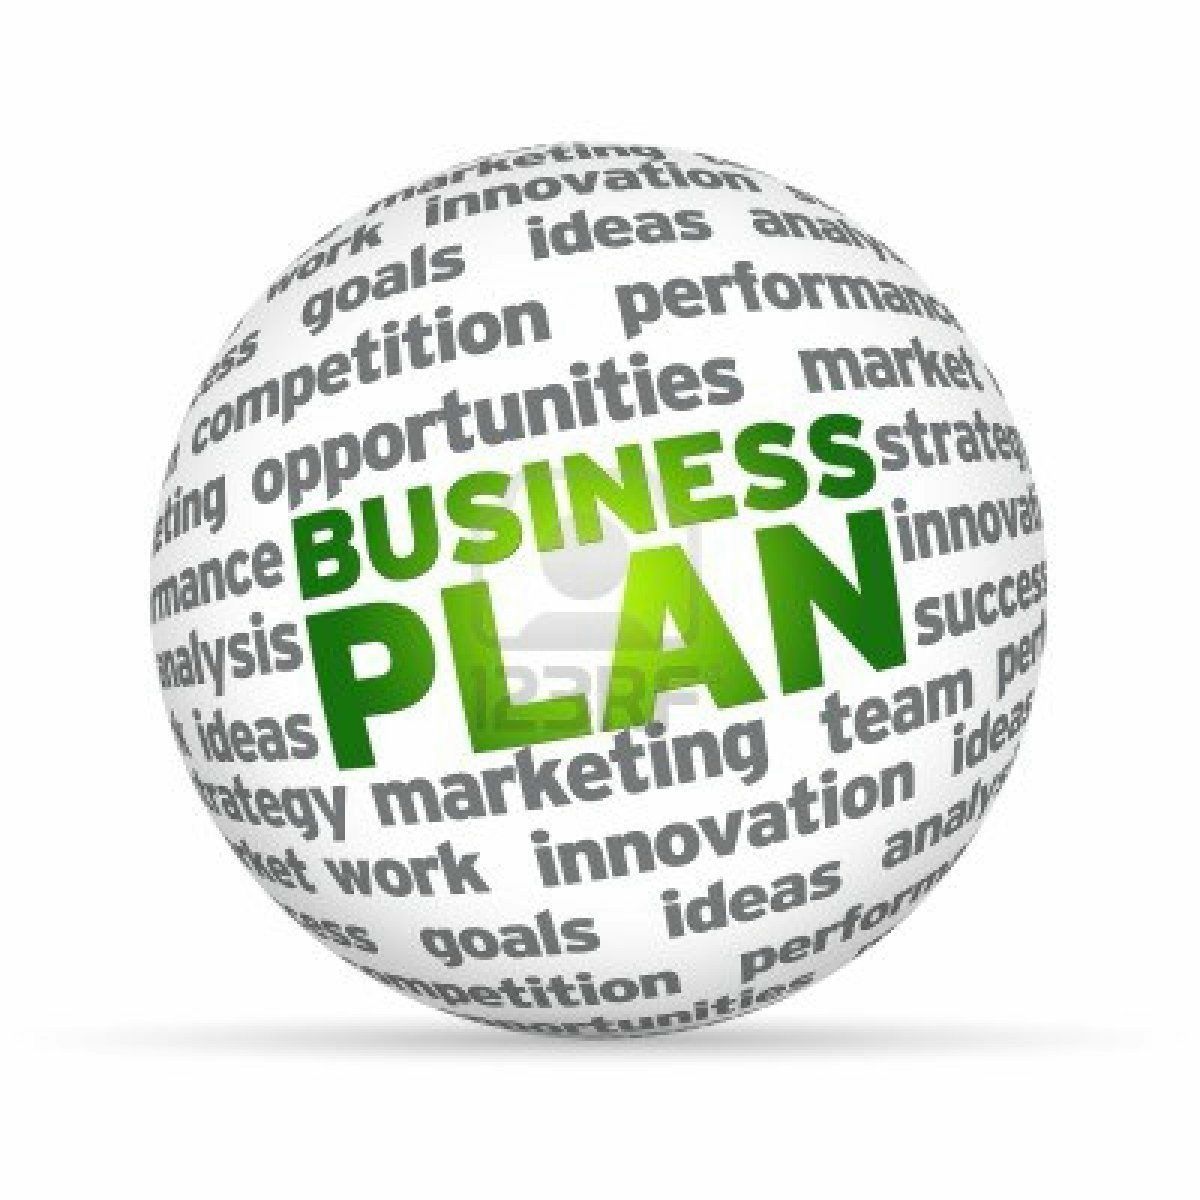 Creating Down Business Objectives 2